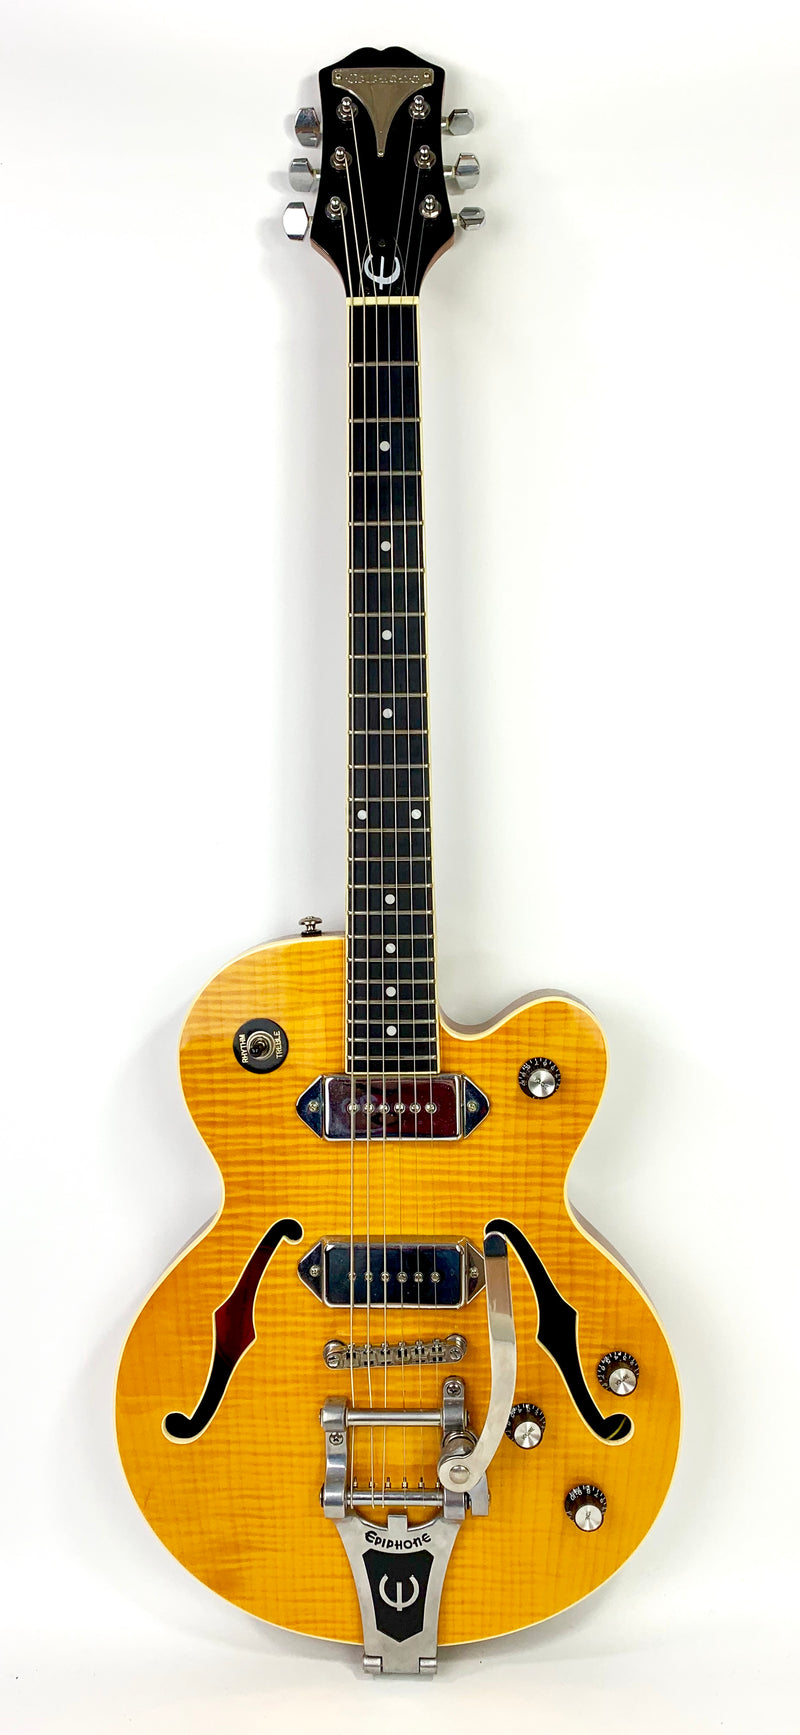 Epiphone Wildkat from 2001